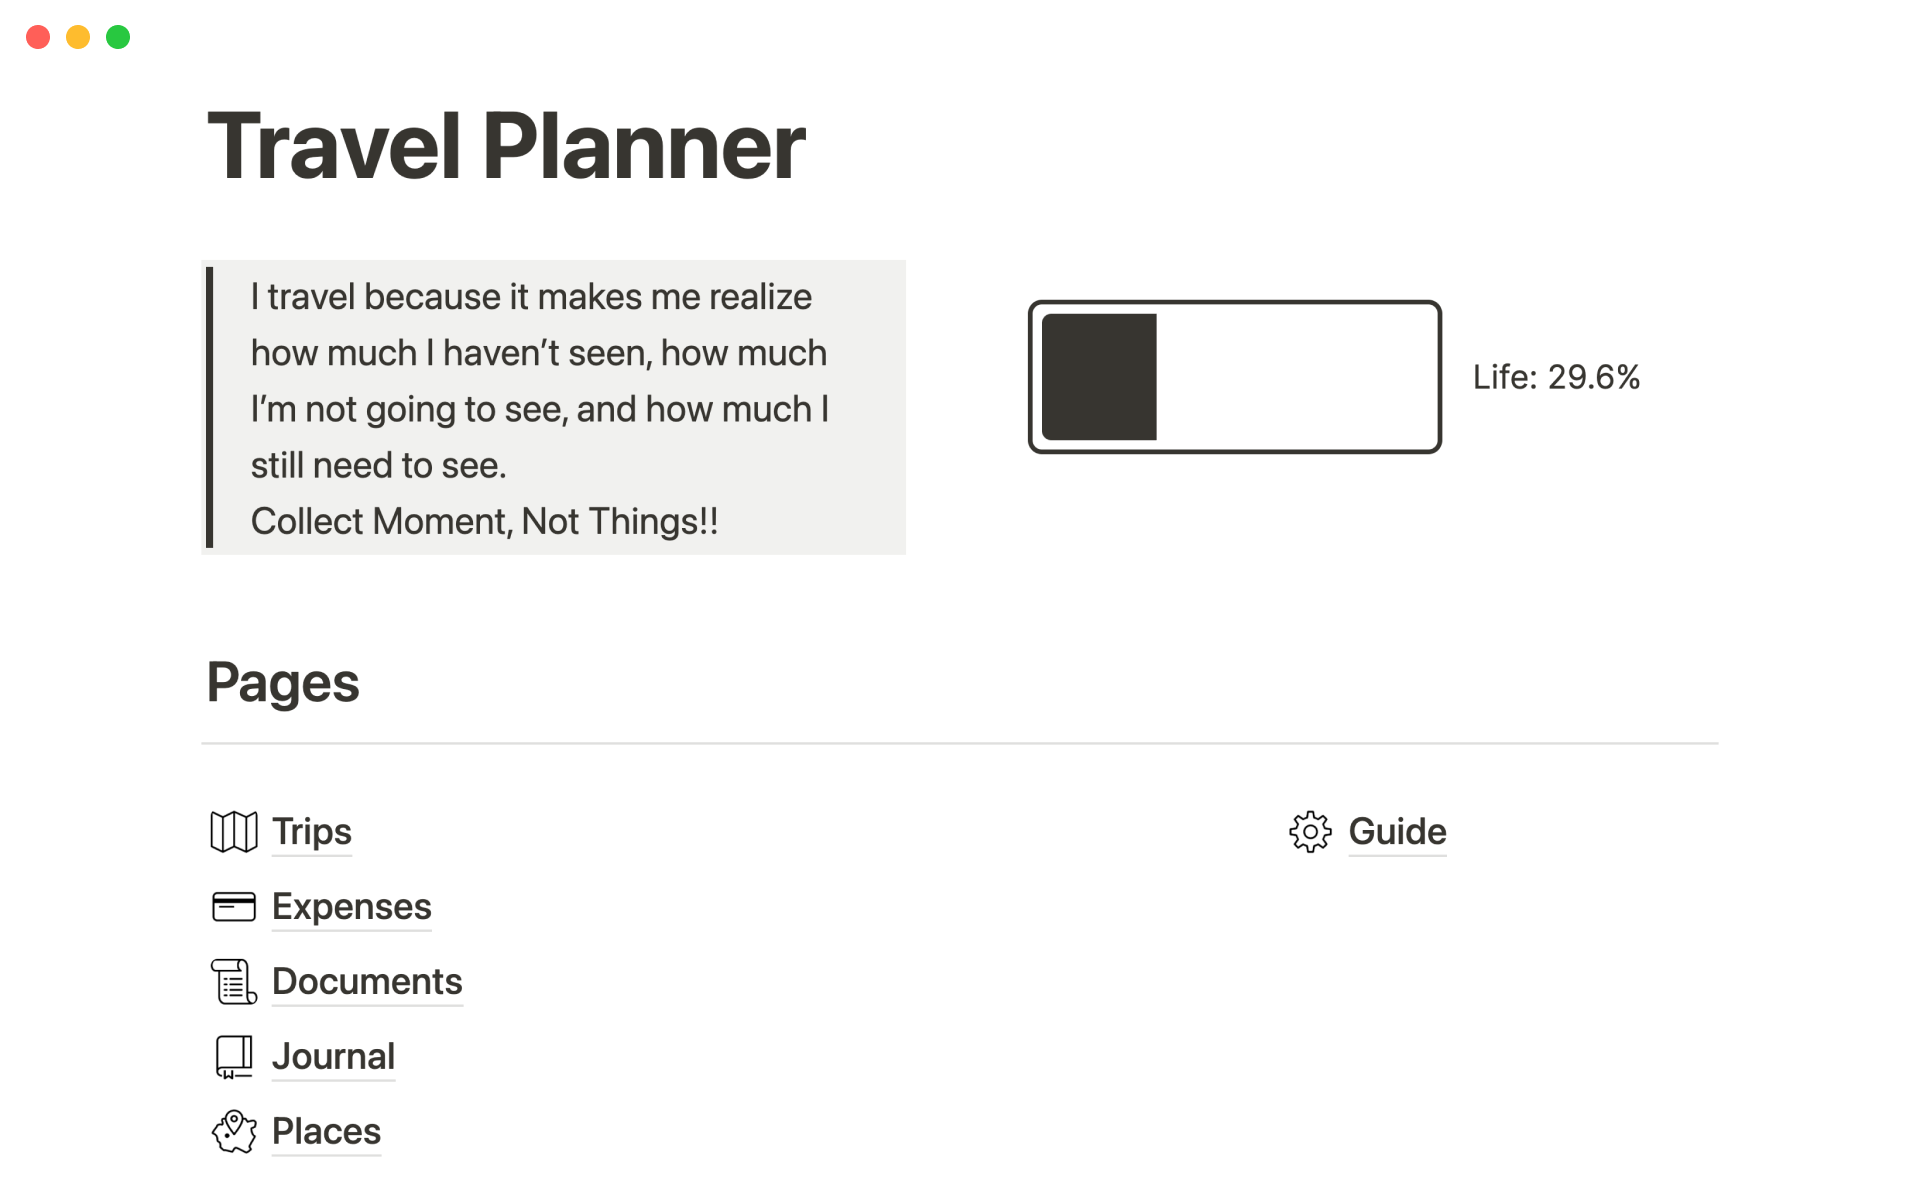 Turn your travel bucket list into a bulletproof action plan and manage all your adventures in one place.